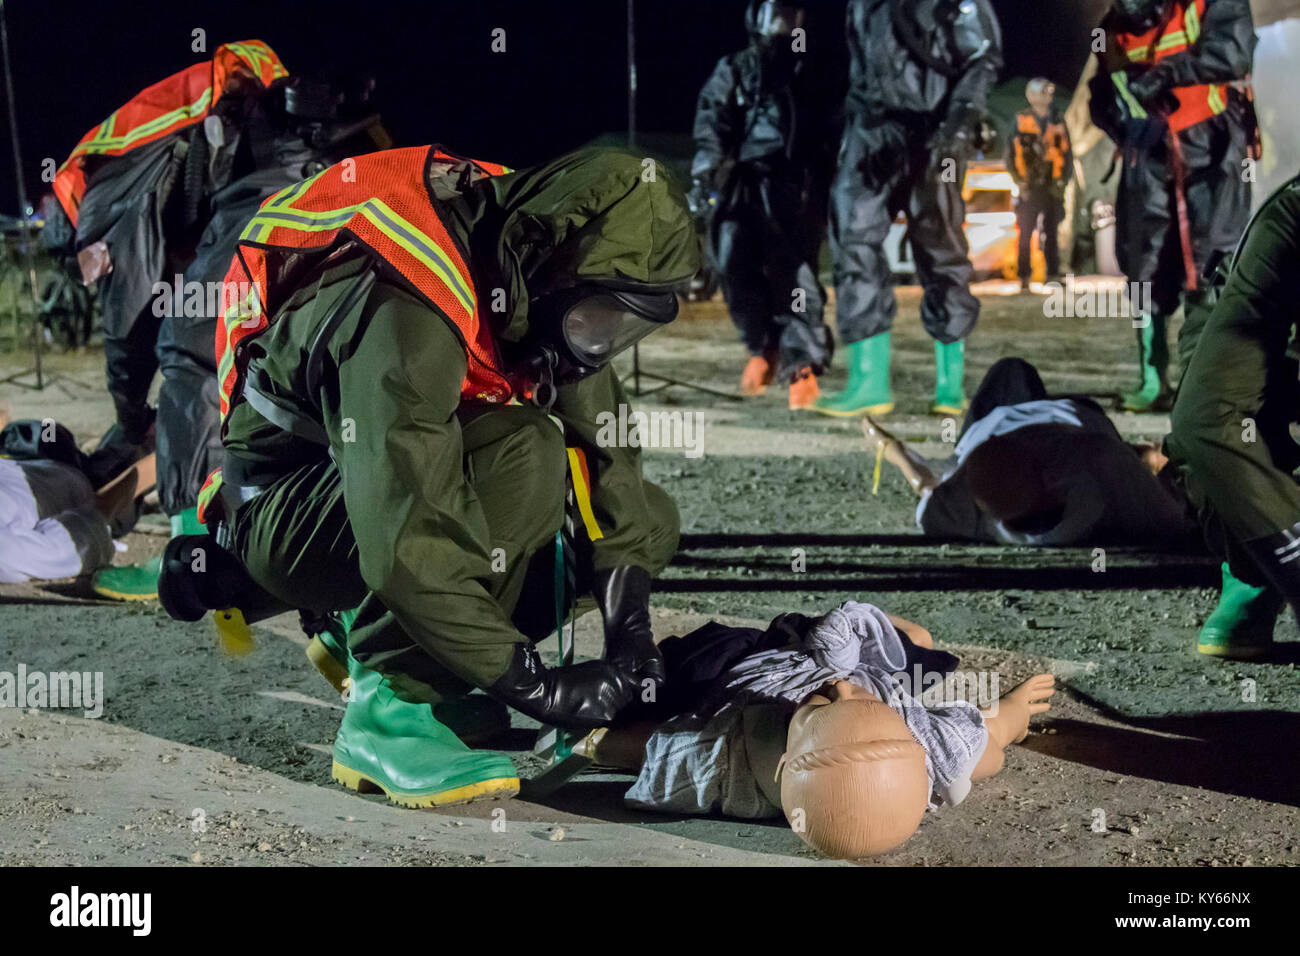 U.S. Army Soldier assesses simulated casualties during a Mass Casualty Decontamination exercise at the Homestead-Miami Speedway, in Miami-Dade, Florida, Jan. 9, 2018. This is the 3rd in a series of joint training exercises between Active Duty, Guard, and Reserve Army units and local municipalities across the United States. This JTE focused on the decontamination and transportation of casualties in a simulated mass chemical attack. (DoD Stock Photo